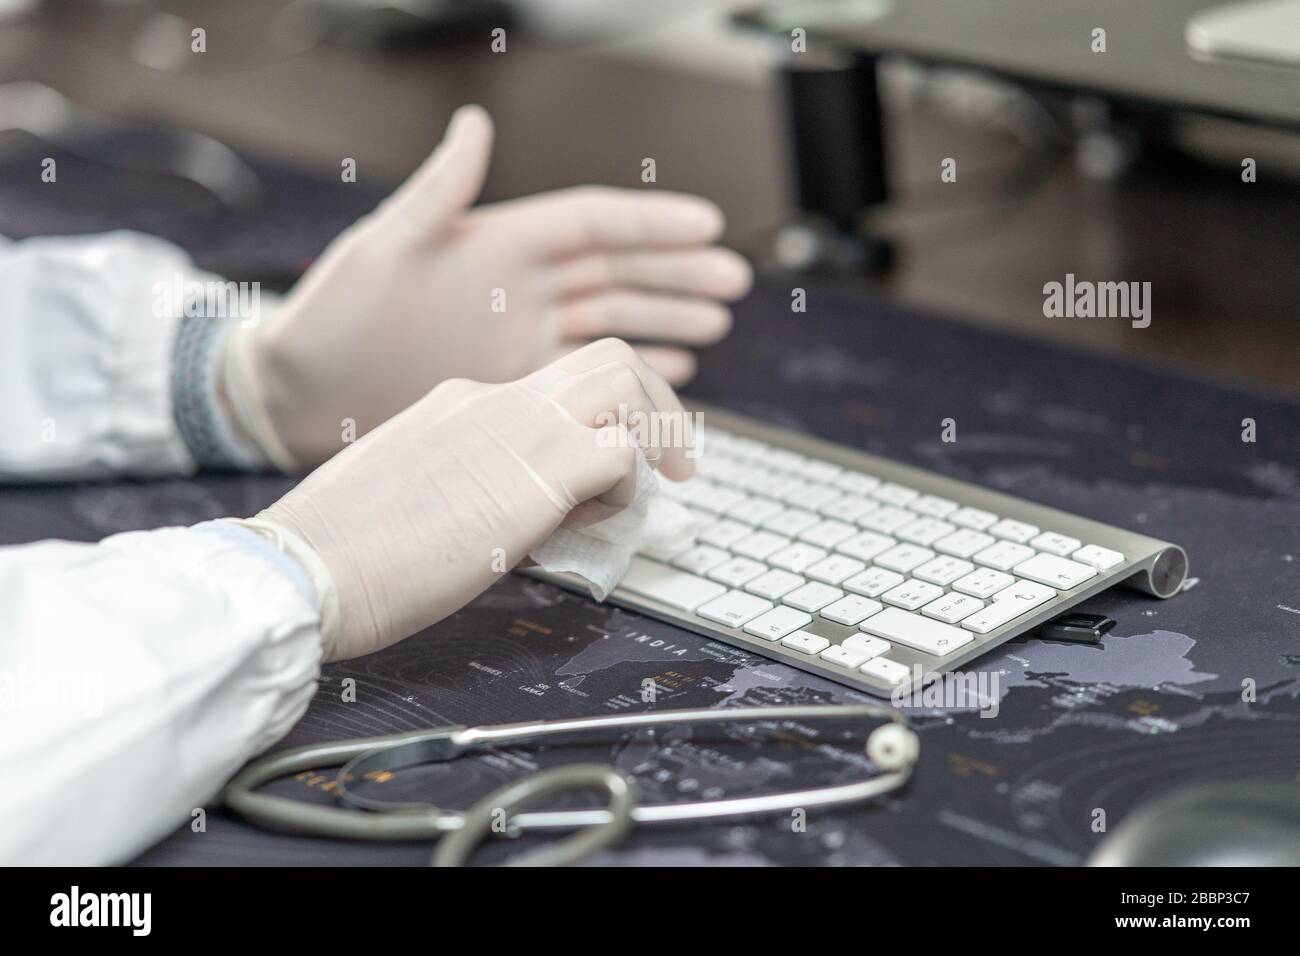 Confident doctor wearing mask and gloves at the medical studio in coronavirus times, cleaning his computer keyboard. Stock Photo